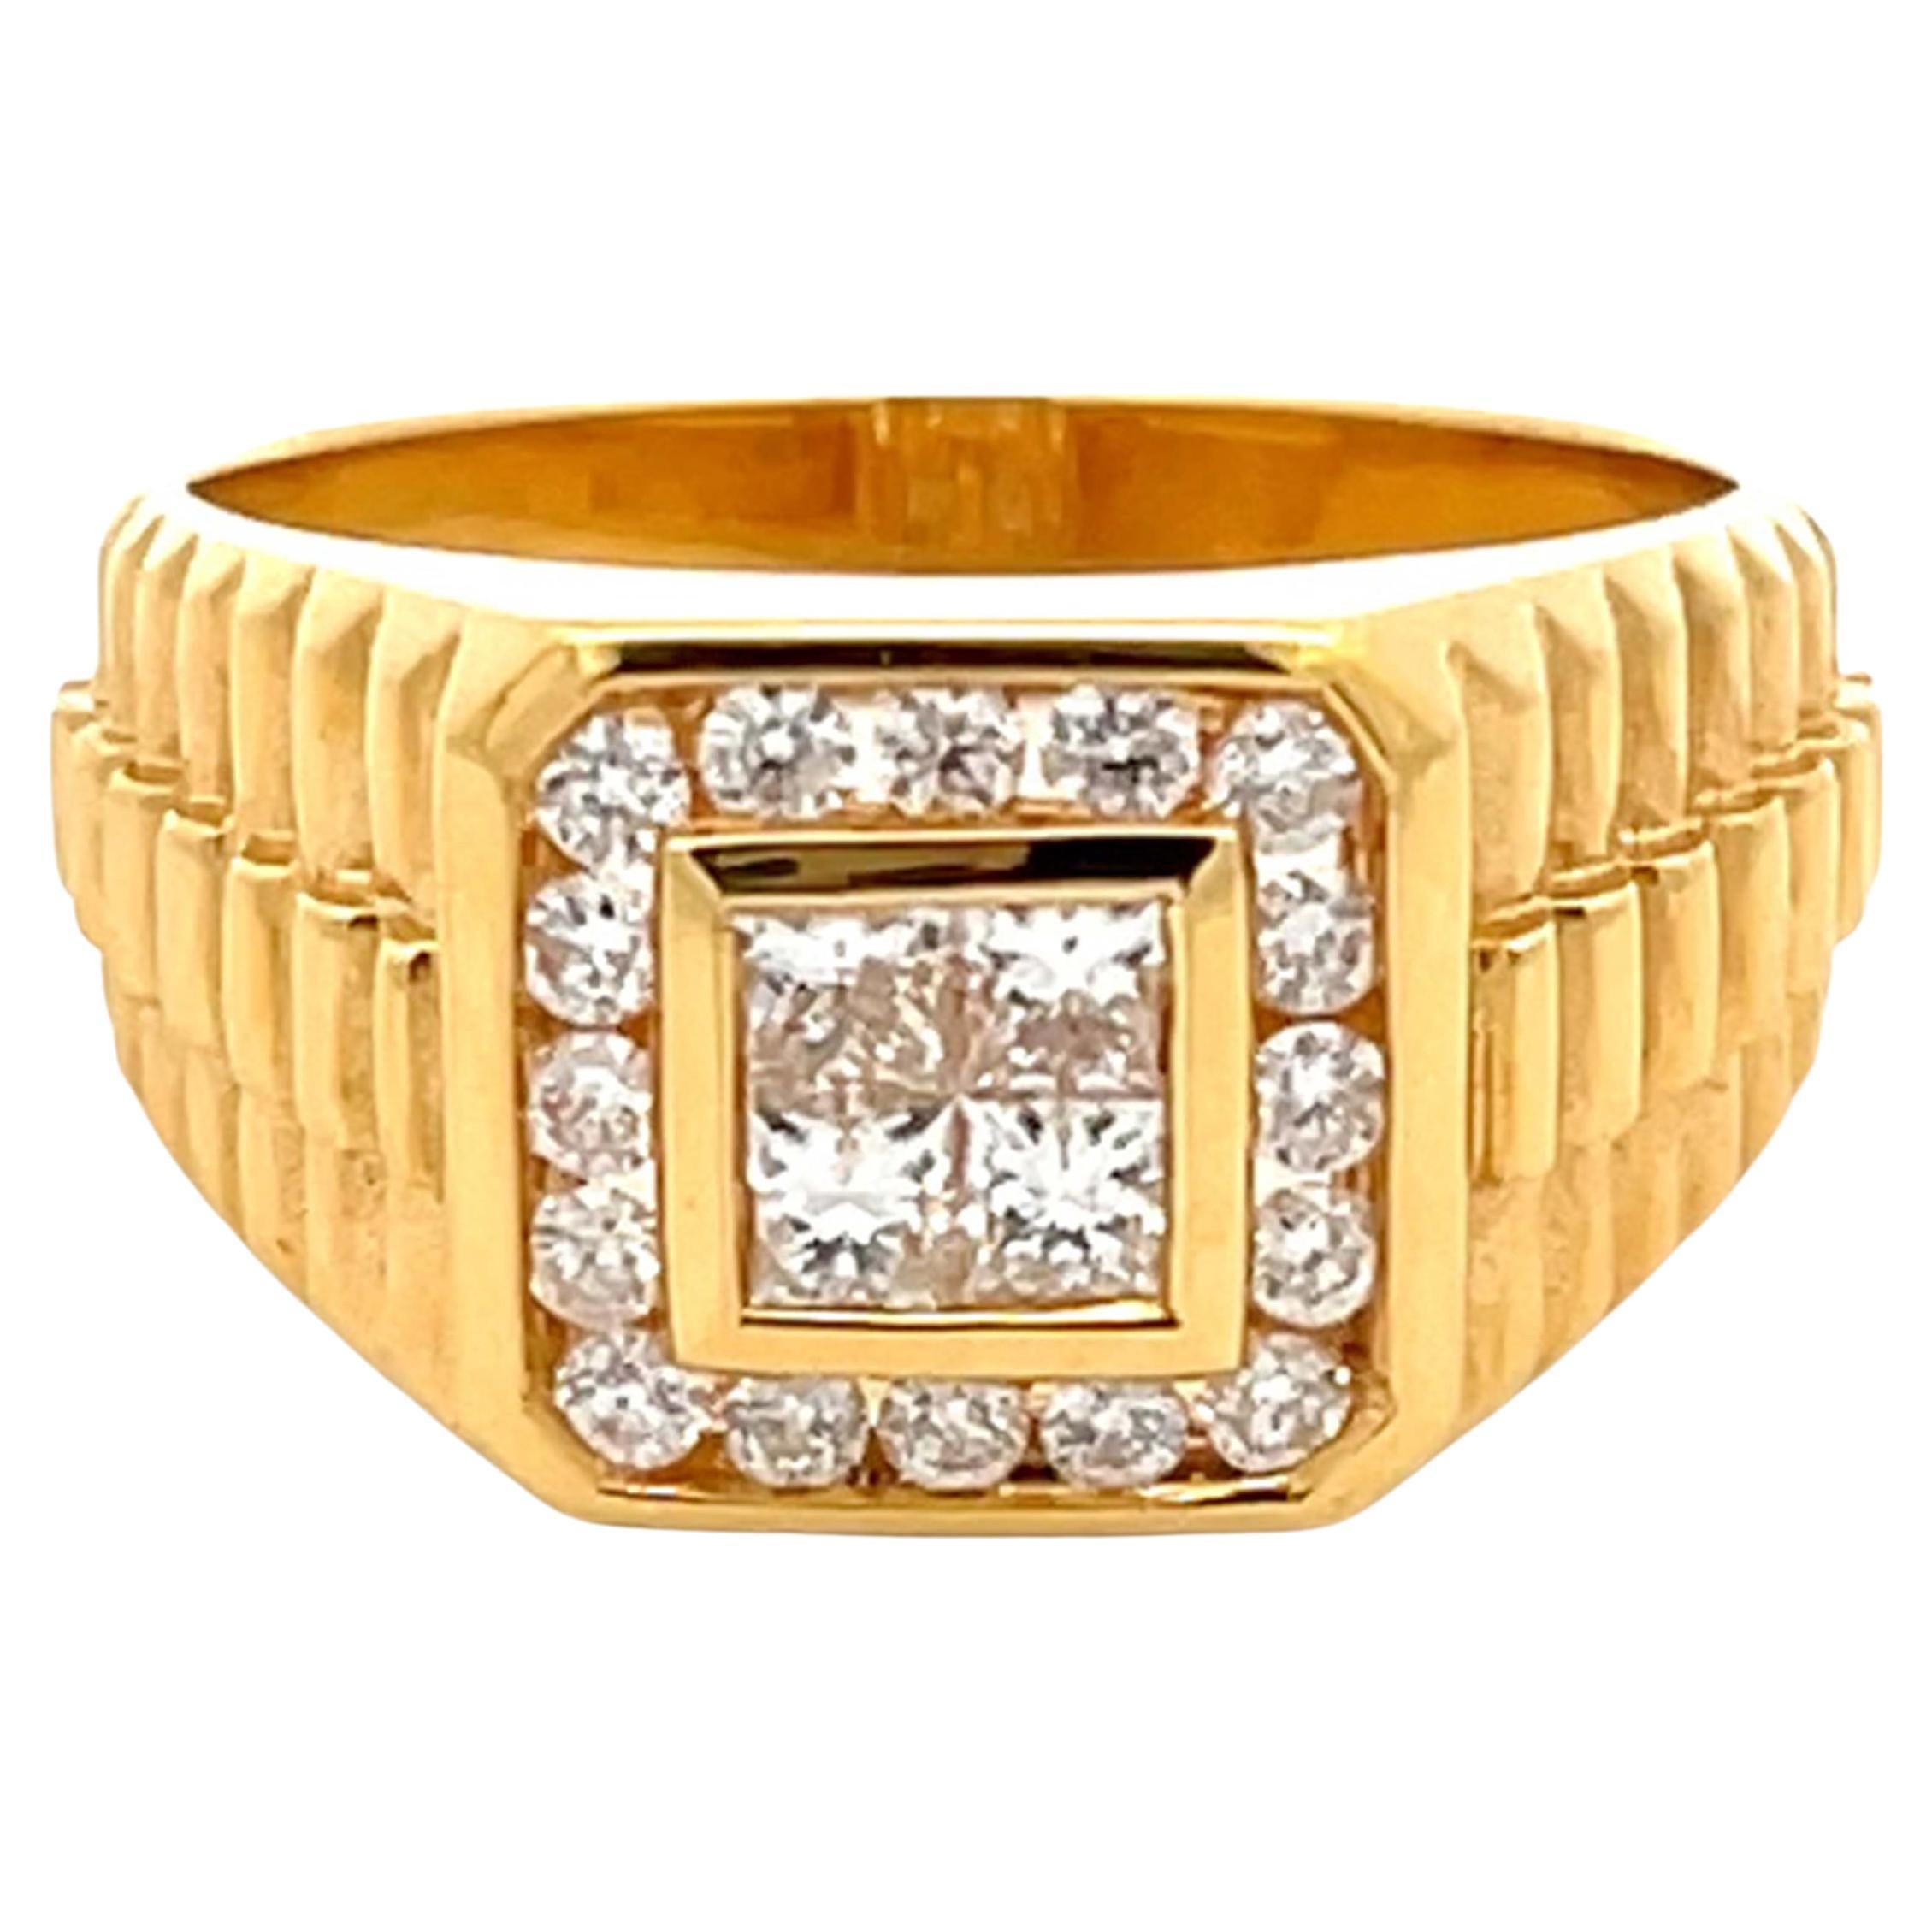 Mens Diamond Halo Rolex Styled Ring in 18K Yellow Gold